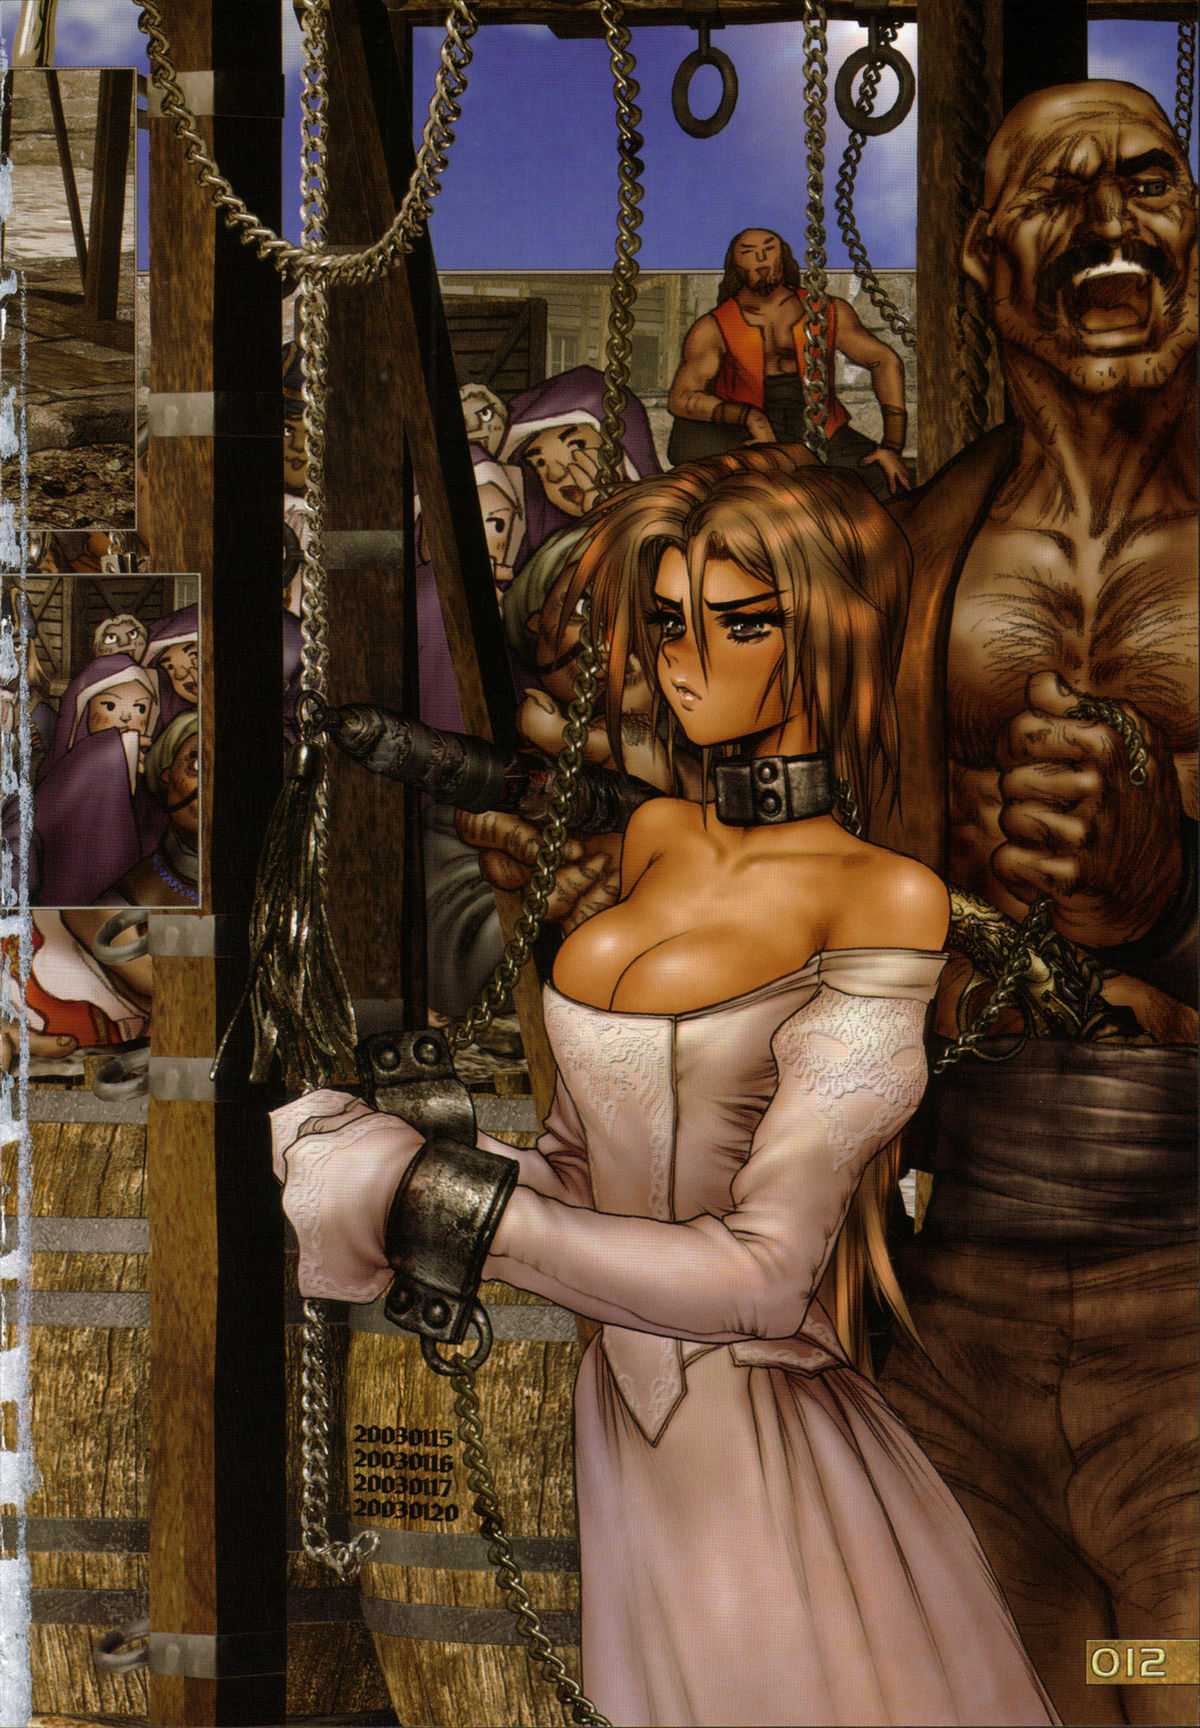 [Masamune Shirow] PIECES 6 HELL CAT [士郎正宗] PIECES 6 HELL CAT [11-06-08]